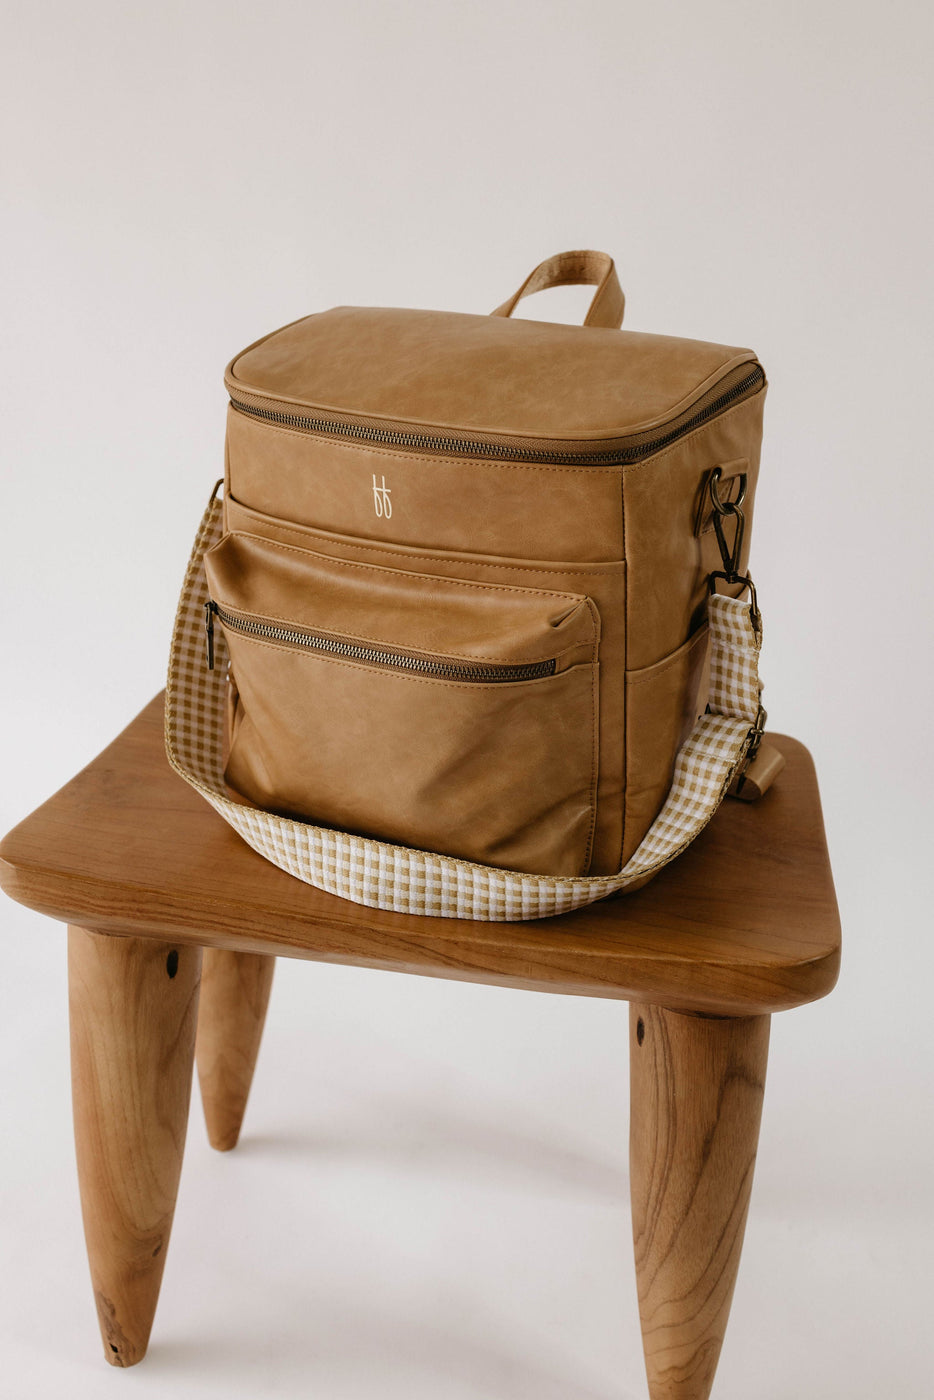 a brown bag on a wooden stool